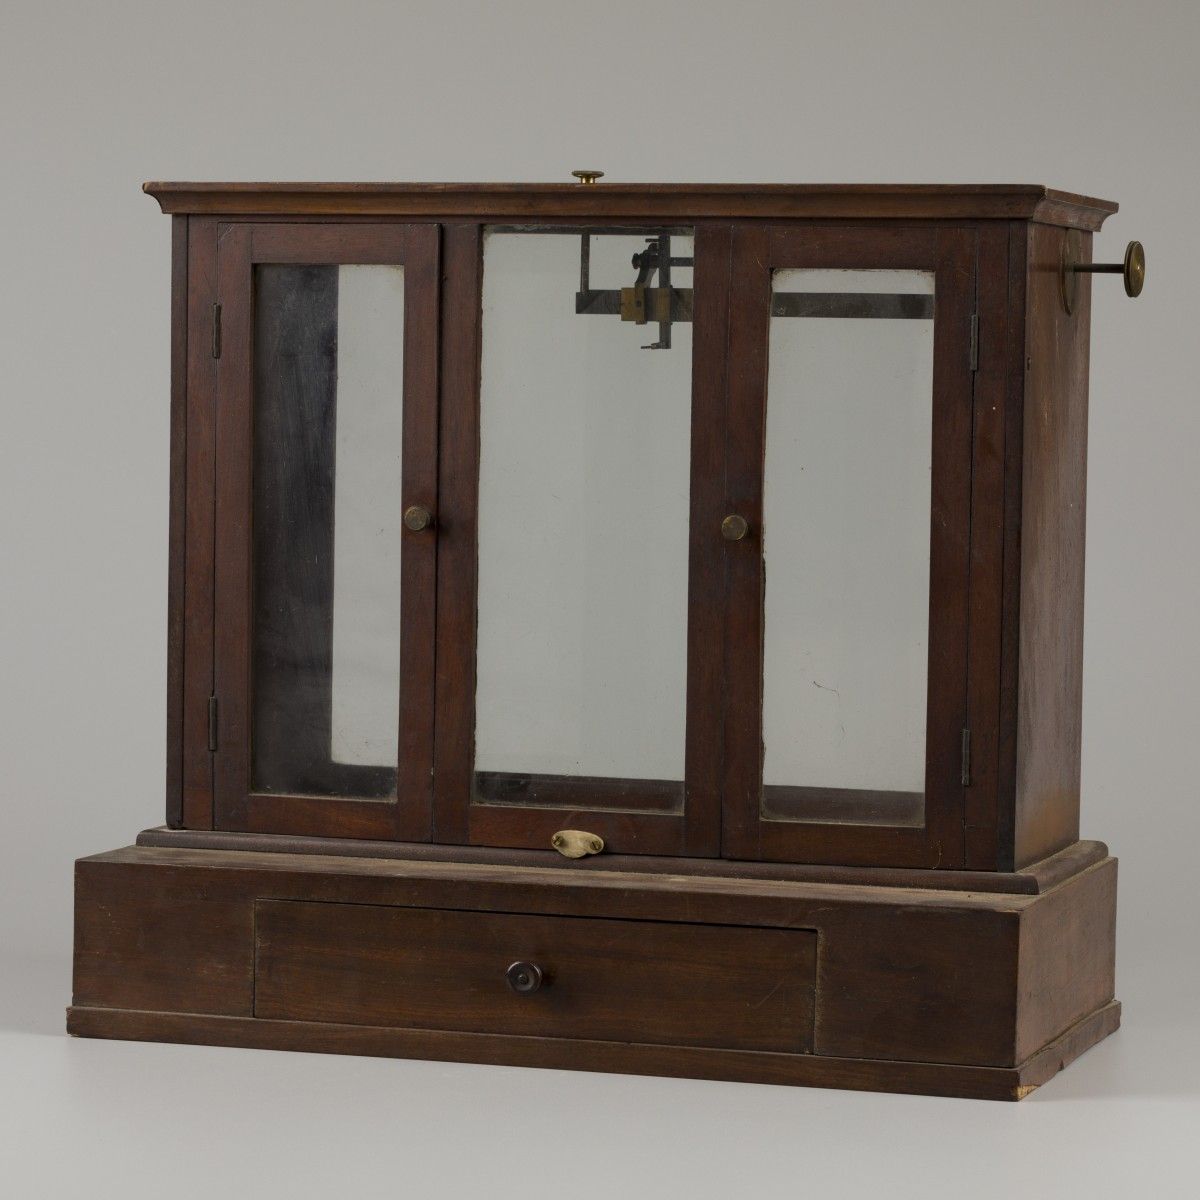 A mahogany veneered apothecary scale with drawer, ca. 1950. Balances et poids ma&hellip;